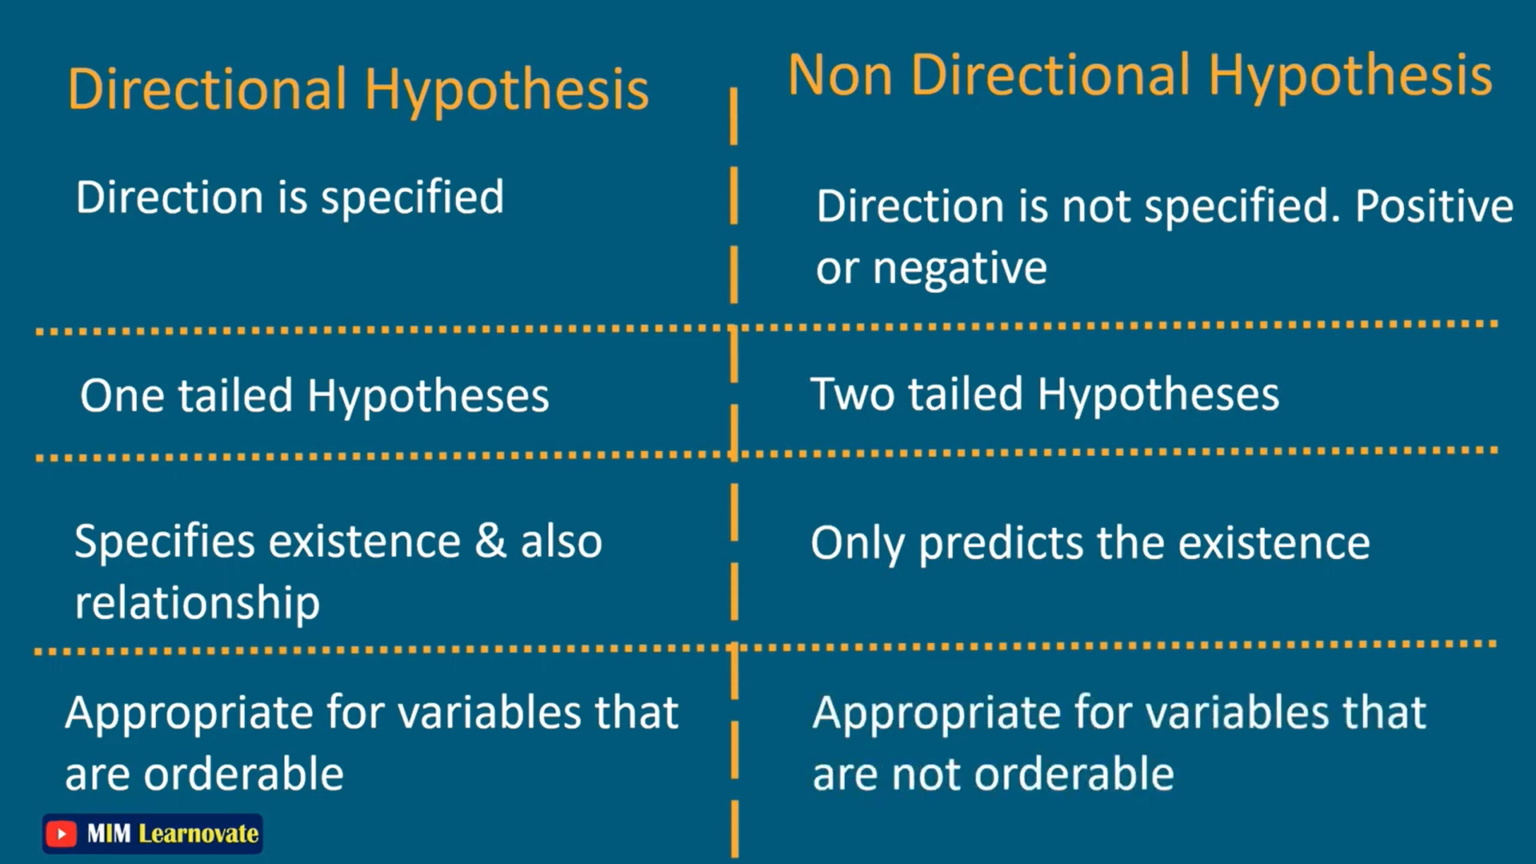 nondirectional hypothesis simple meaning